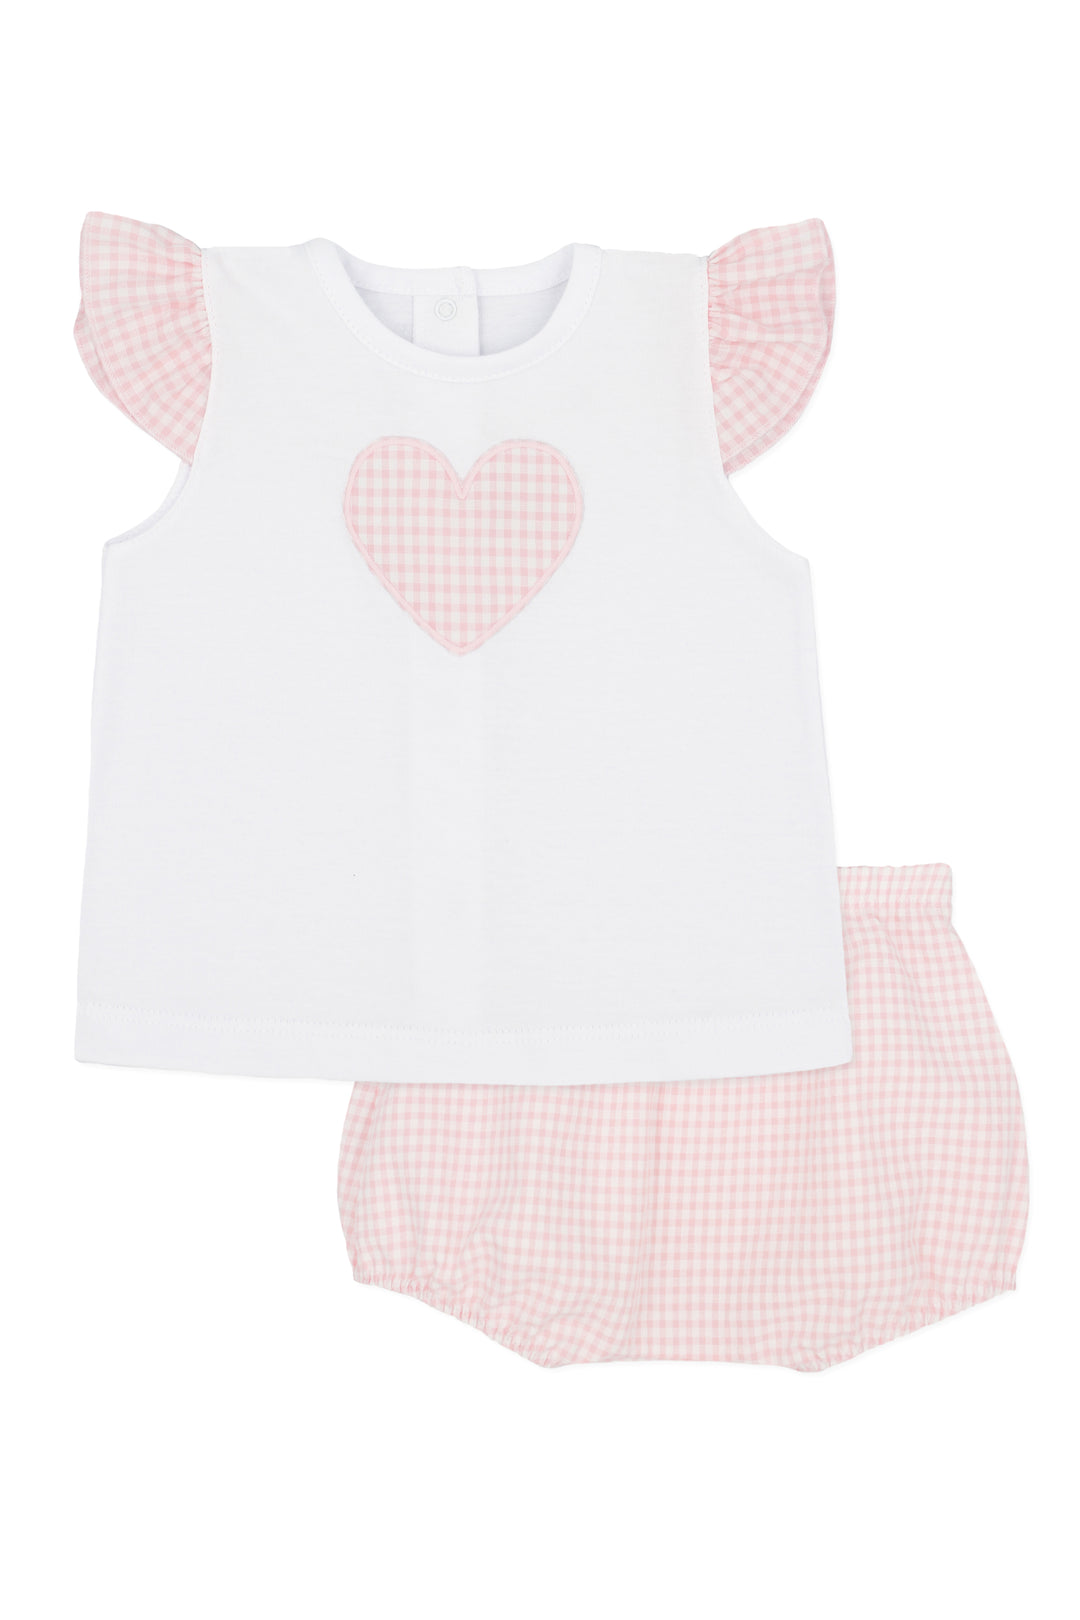 Rapife "Pixie" Pink Gingham Blouse & Bloomers | Millie and John